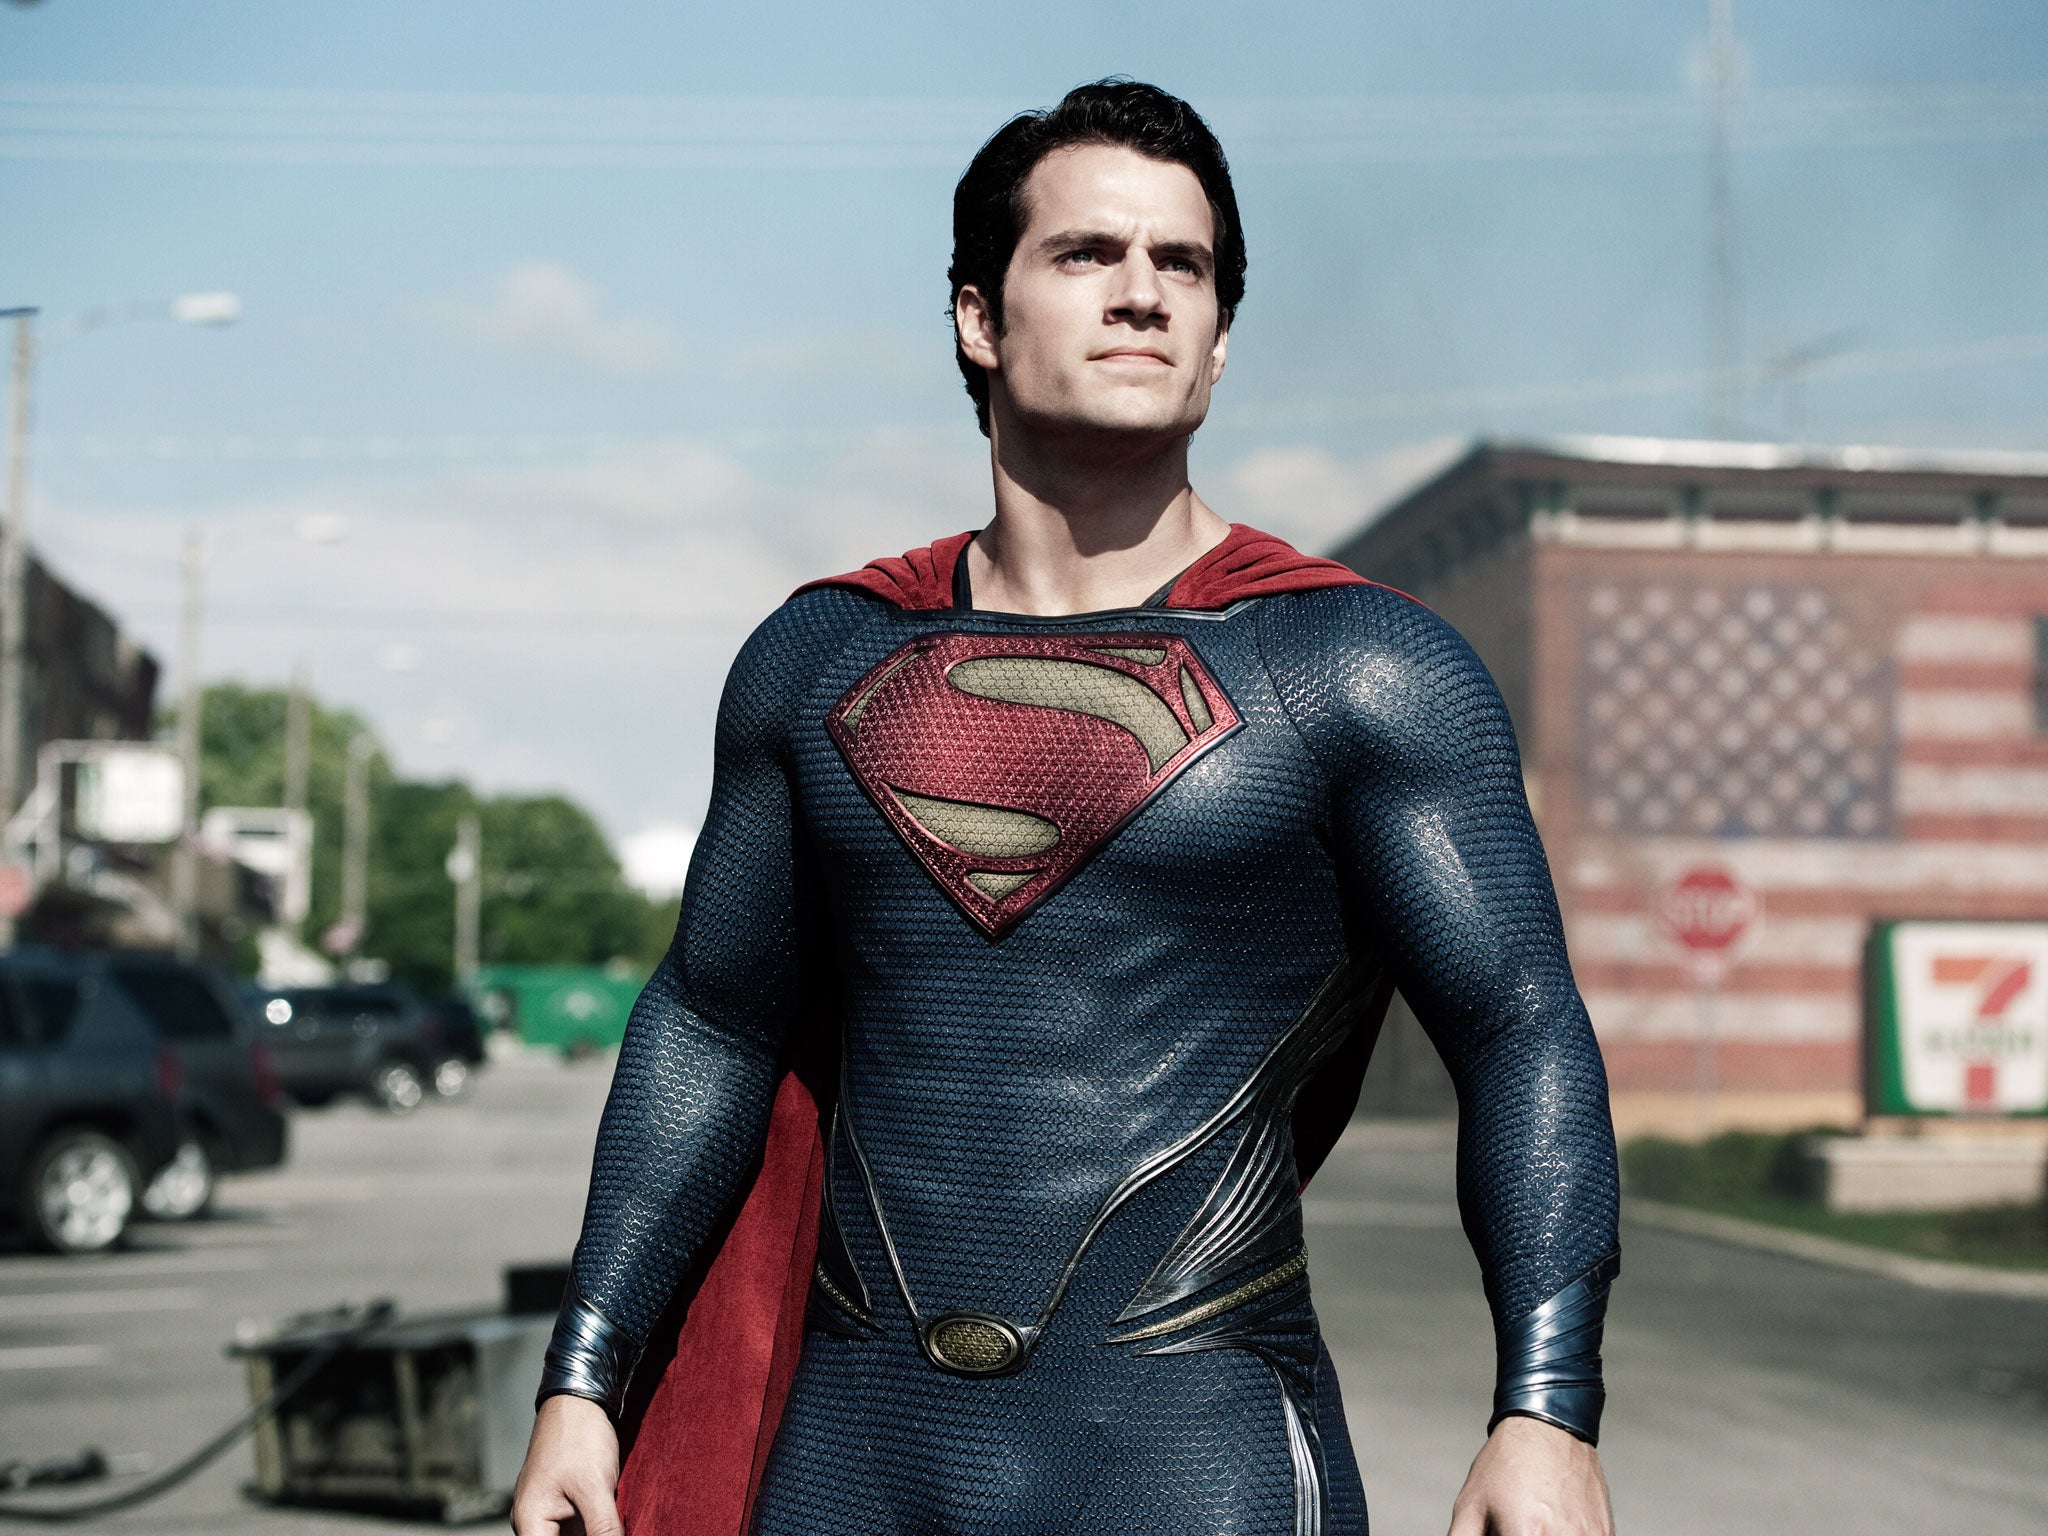 Henry Cavill is the latest Brit actor to nab a big US superhero role